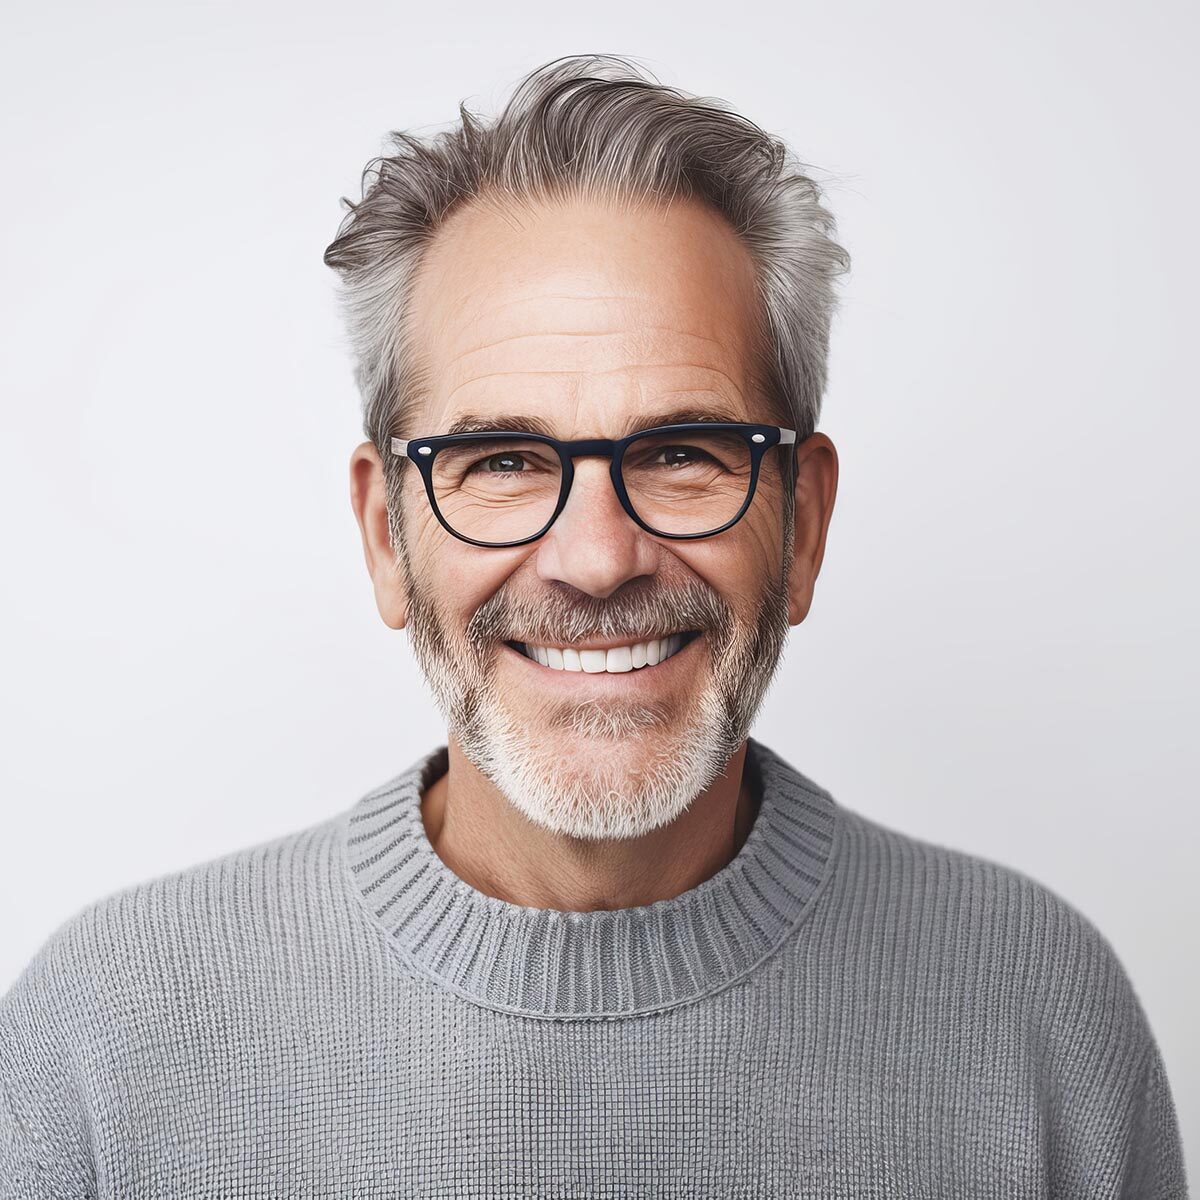 Serenely smiling middle-aged man with gray hair and beard in woo.